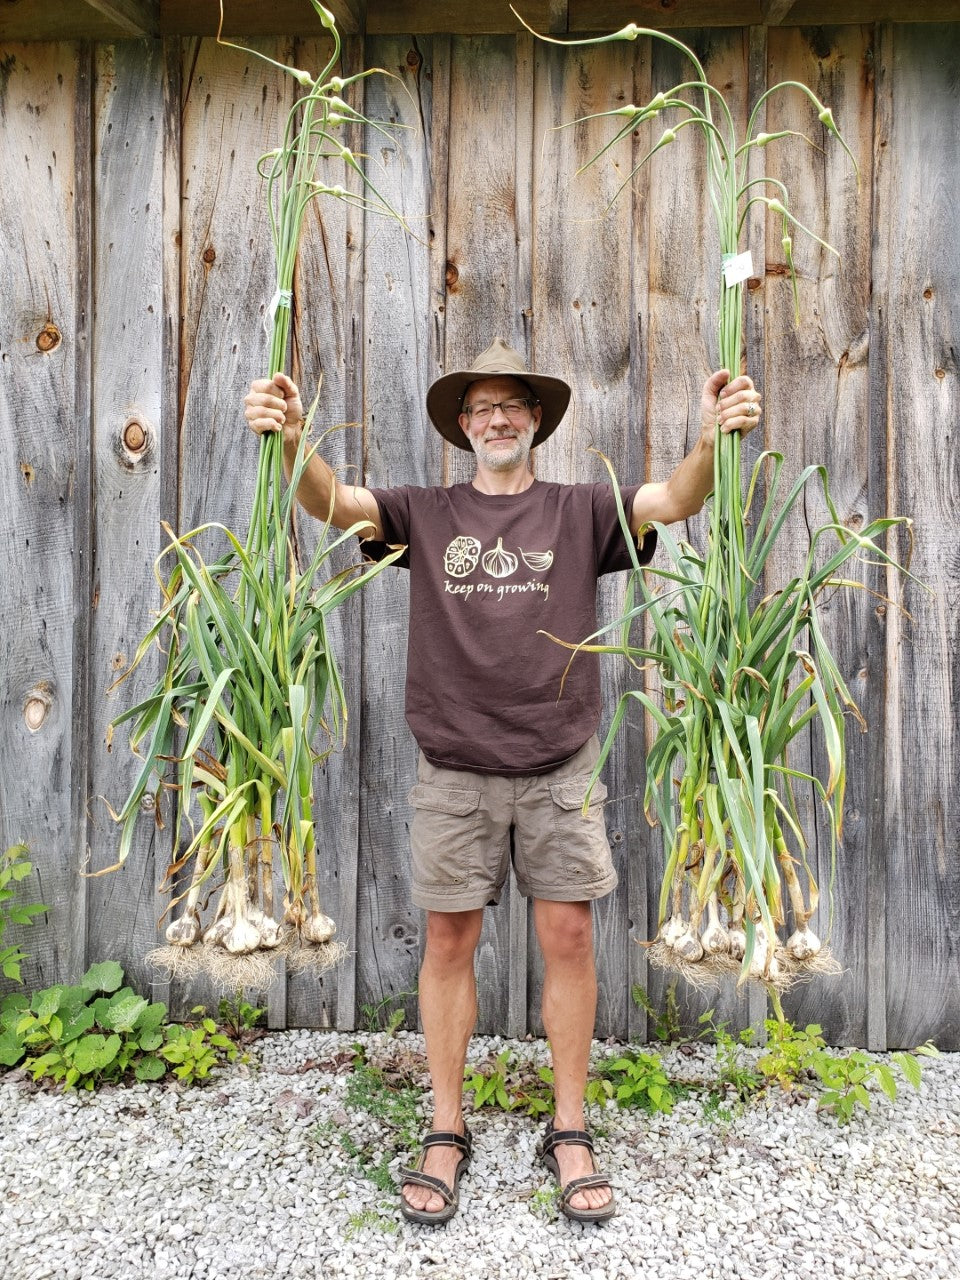 Marchand Lamarre from Garlicoves Ontario Garlic Farmer holding two bunches of Ontario garlic. The most popular garlic grown in Ontario is Music Garlic a porcelain variety. Big garlic bulbs with tall garlic scapes